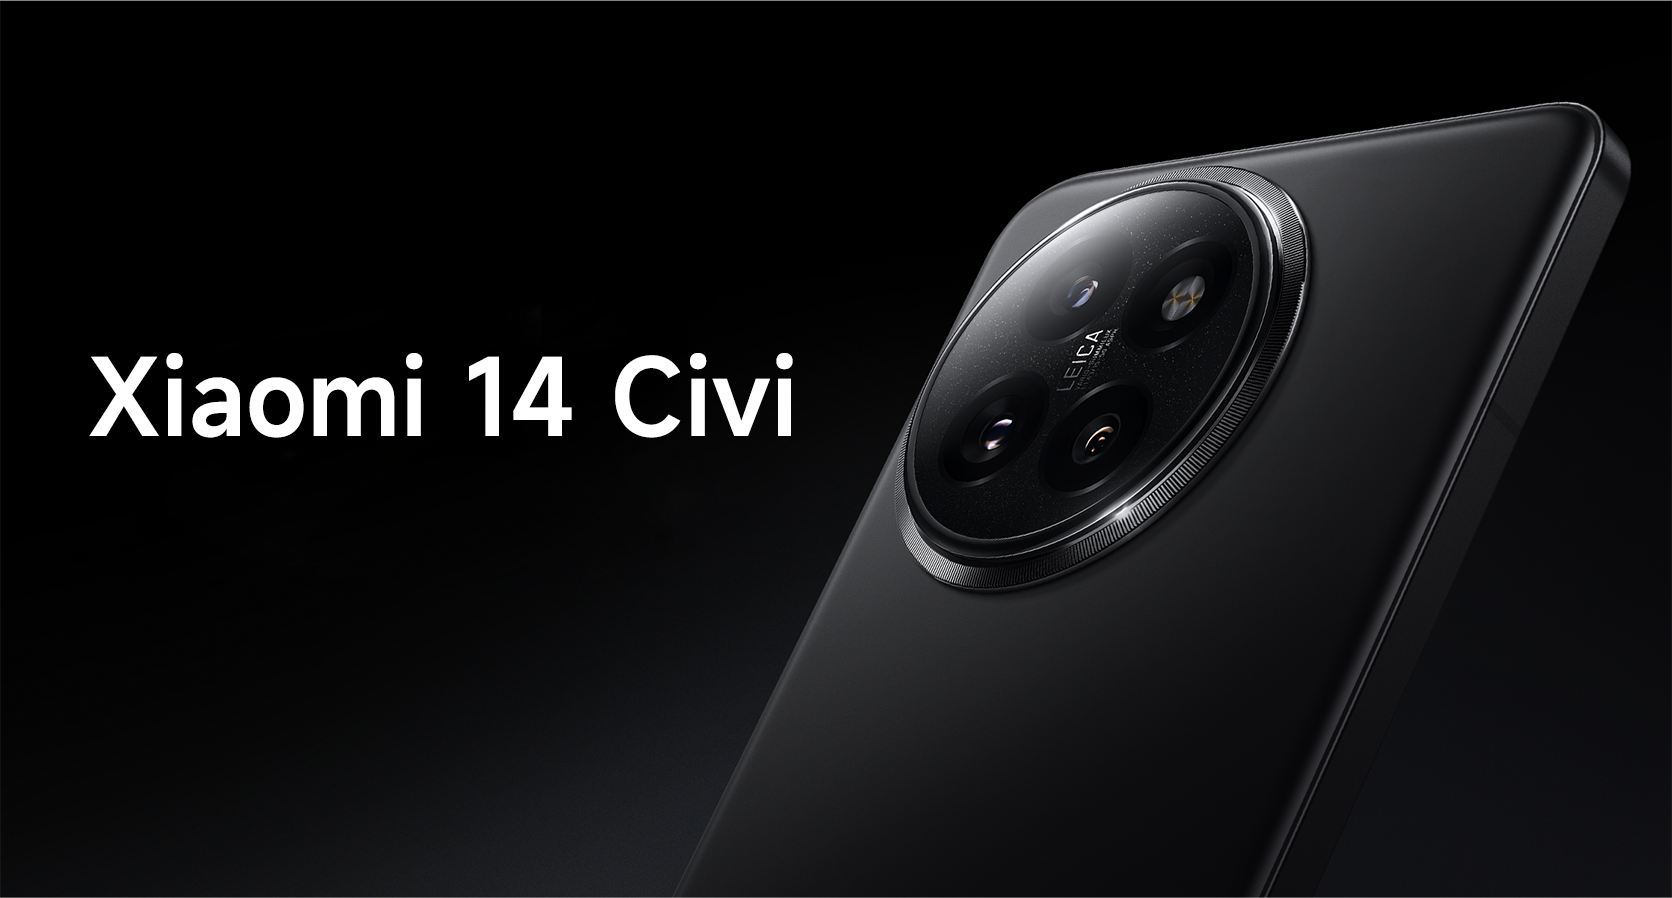 Xiaomi 14 Civi arrives in India, all details leaked - News - News